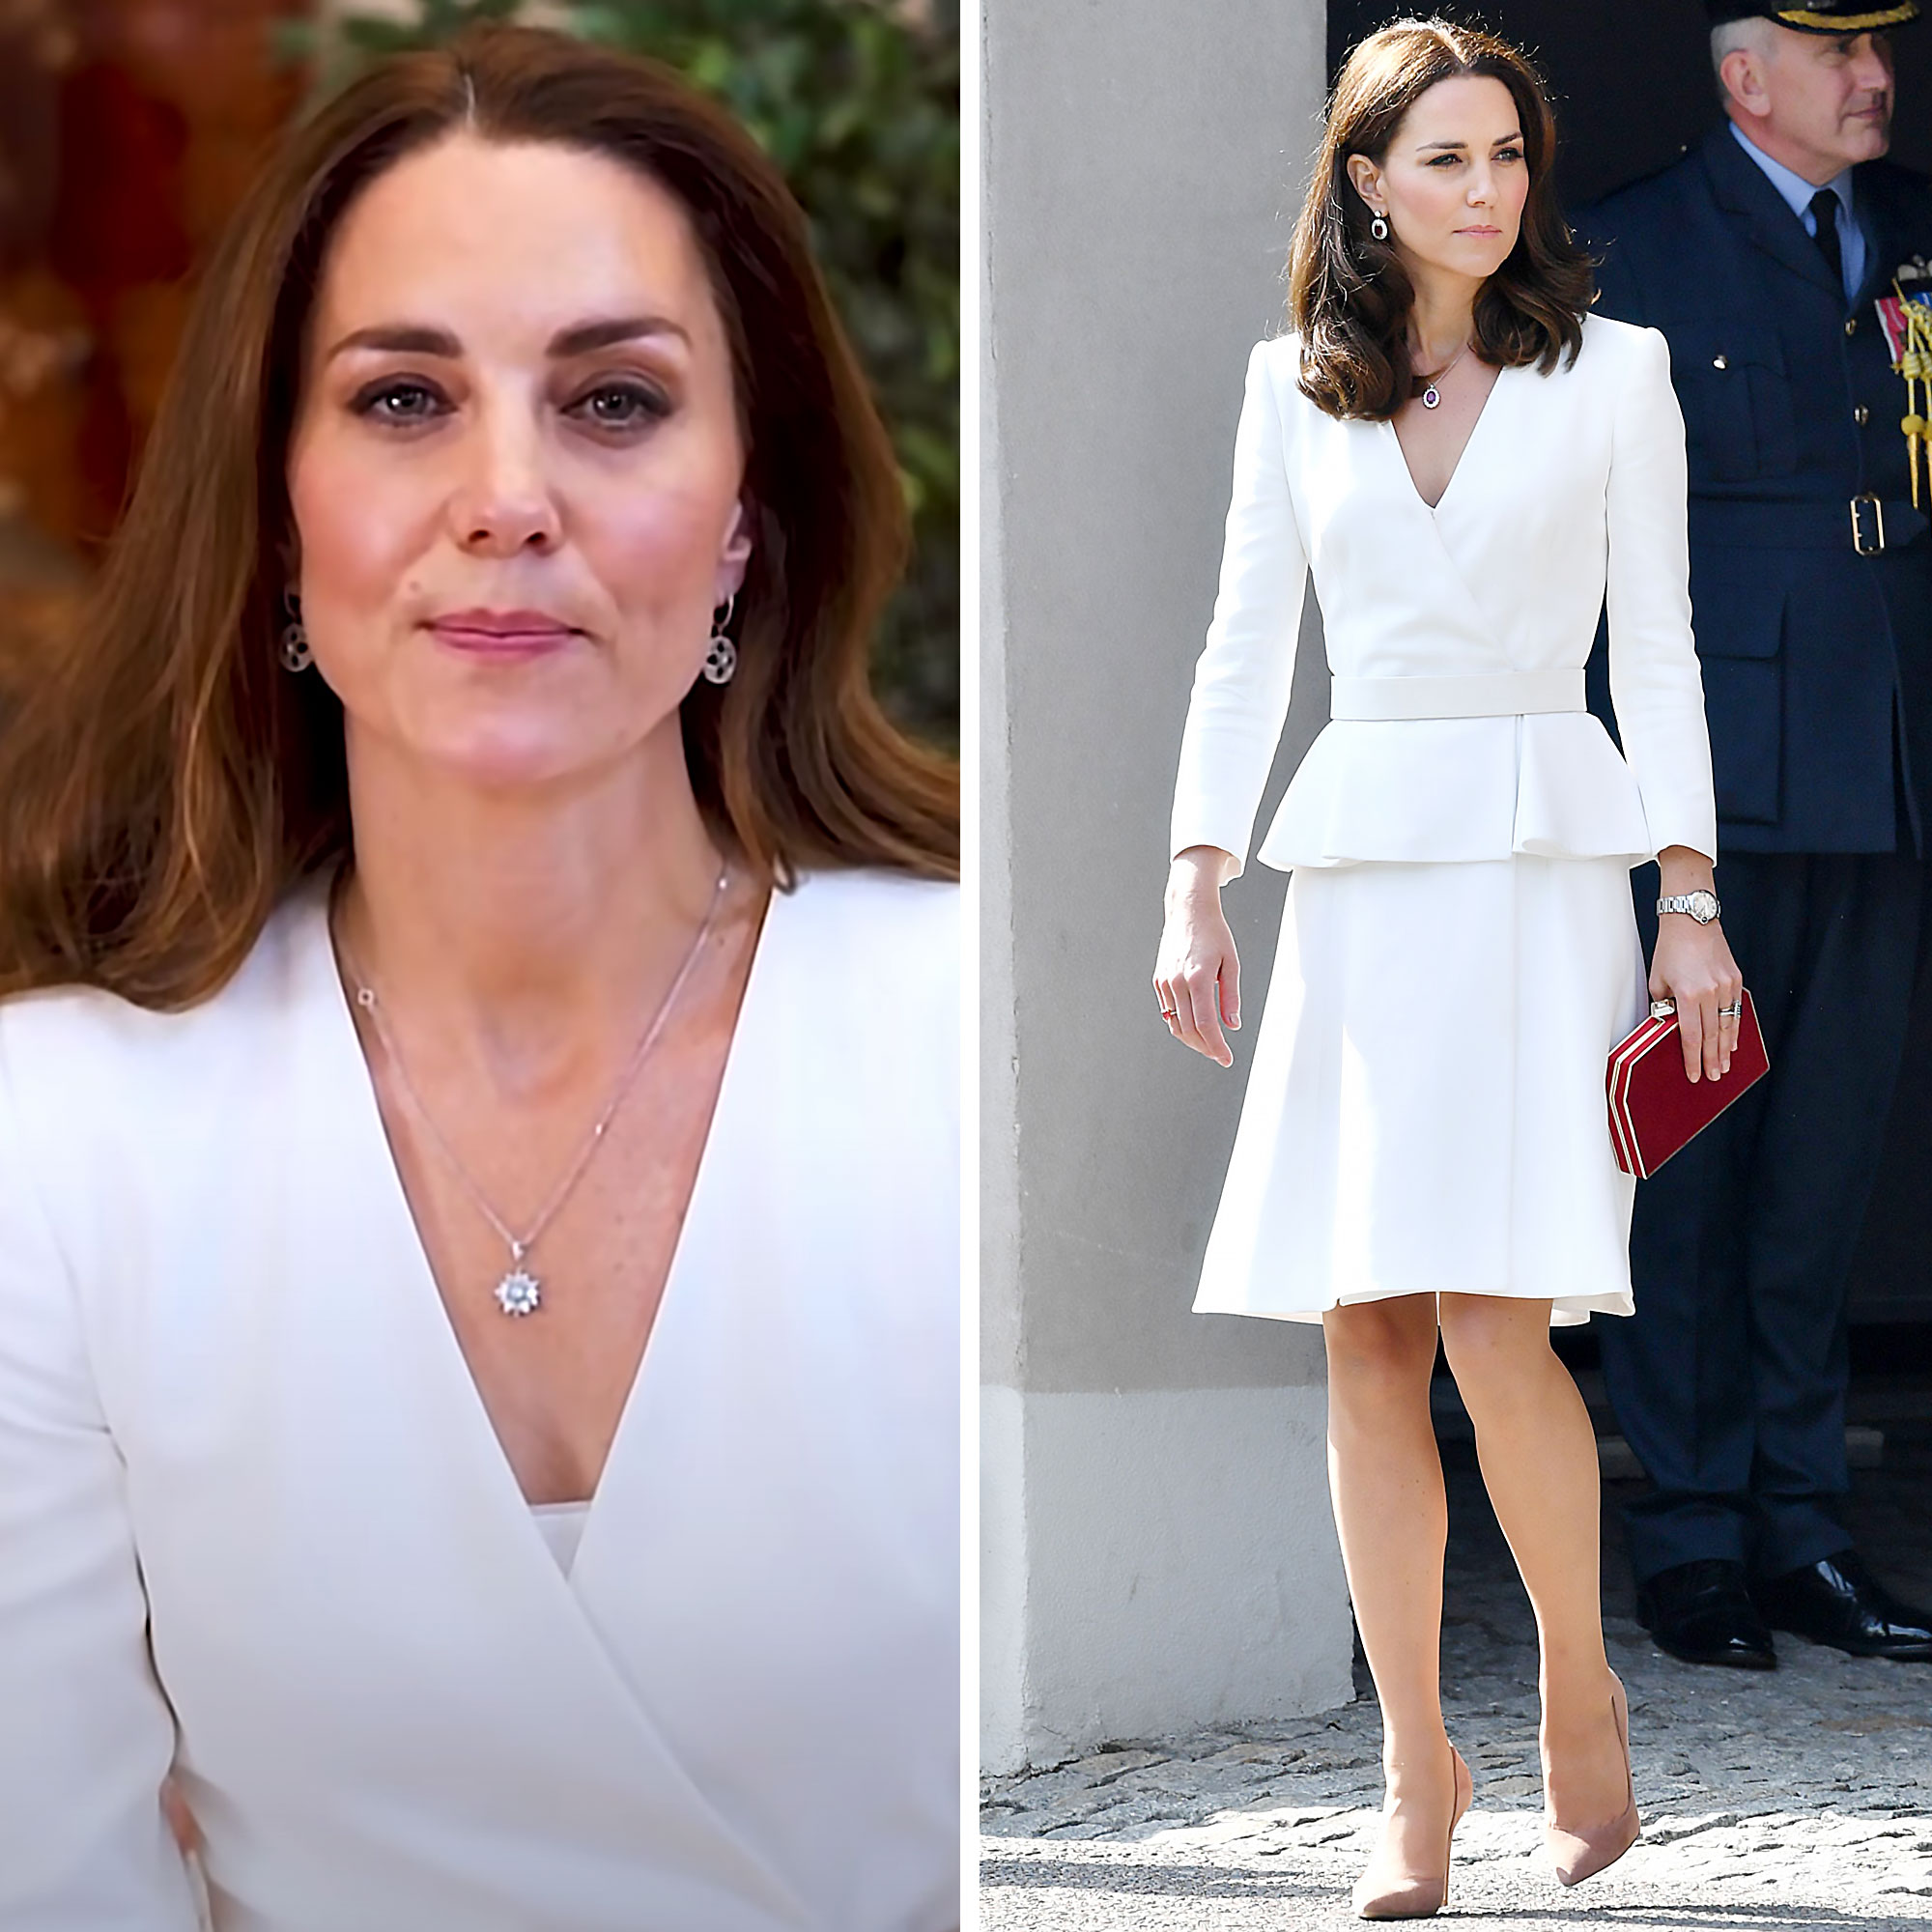 Kate Middleton wears White Lace Dress by Alexander McQueen in